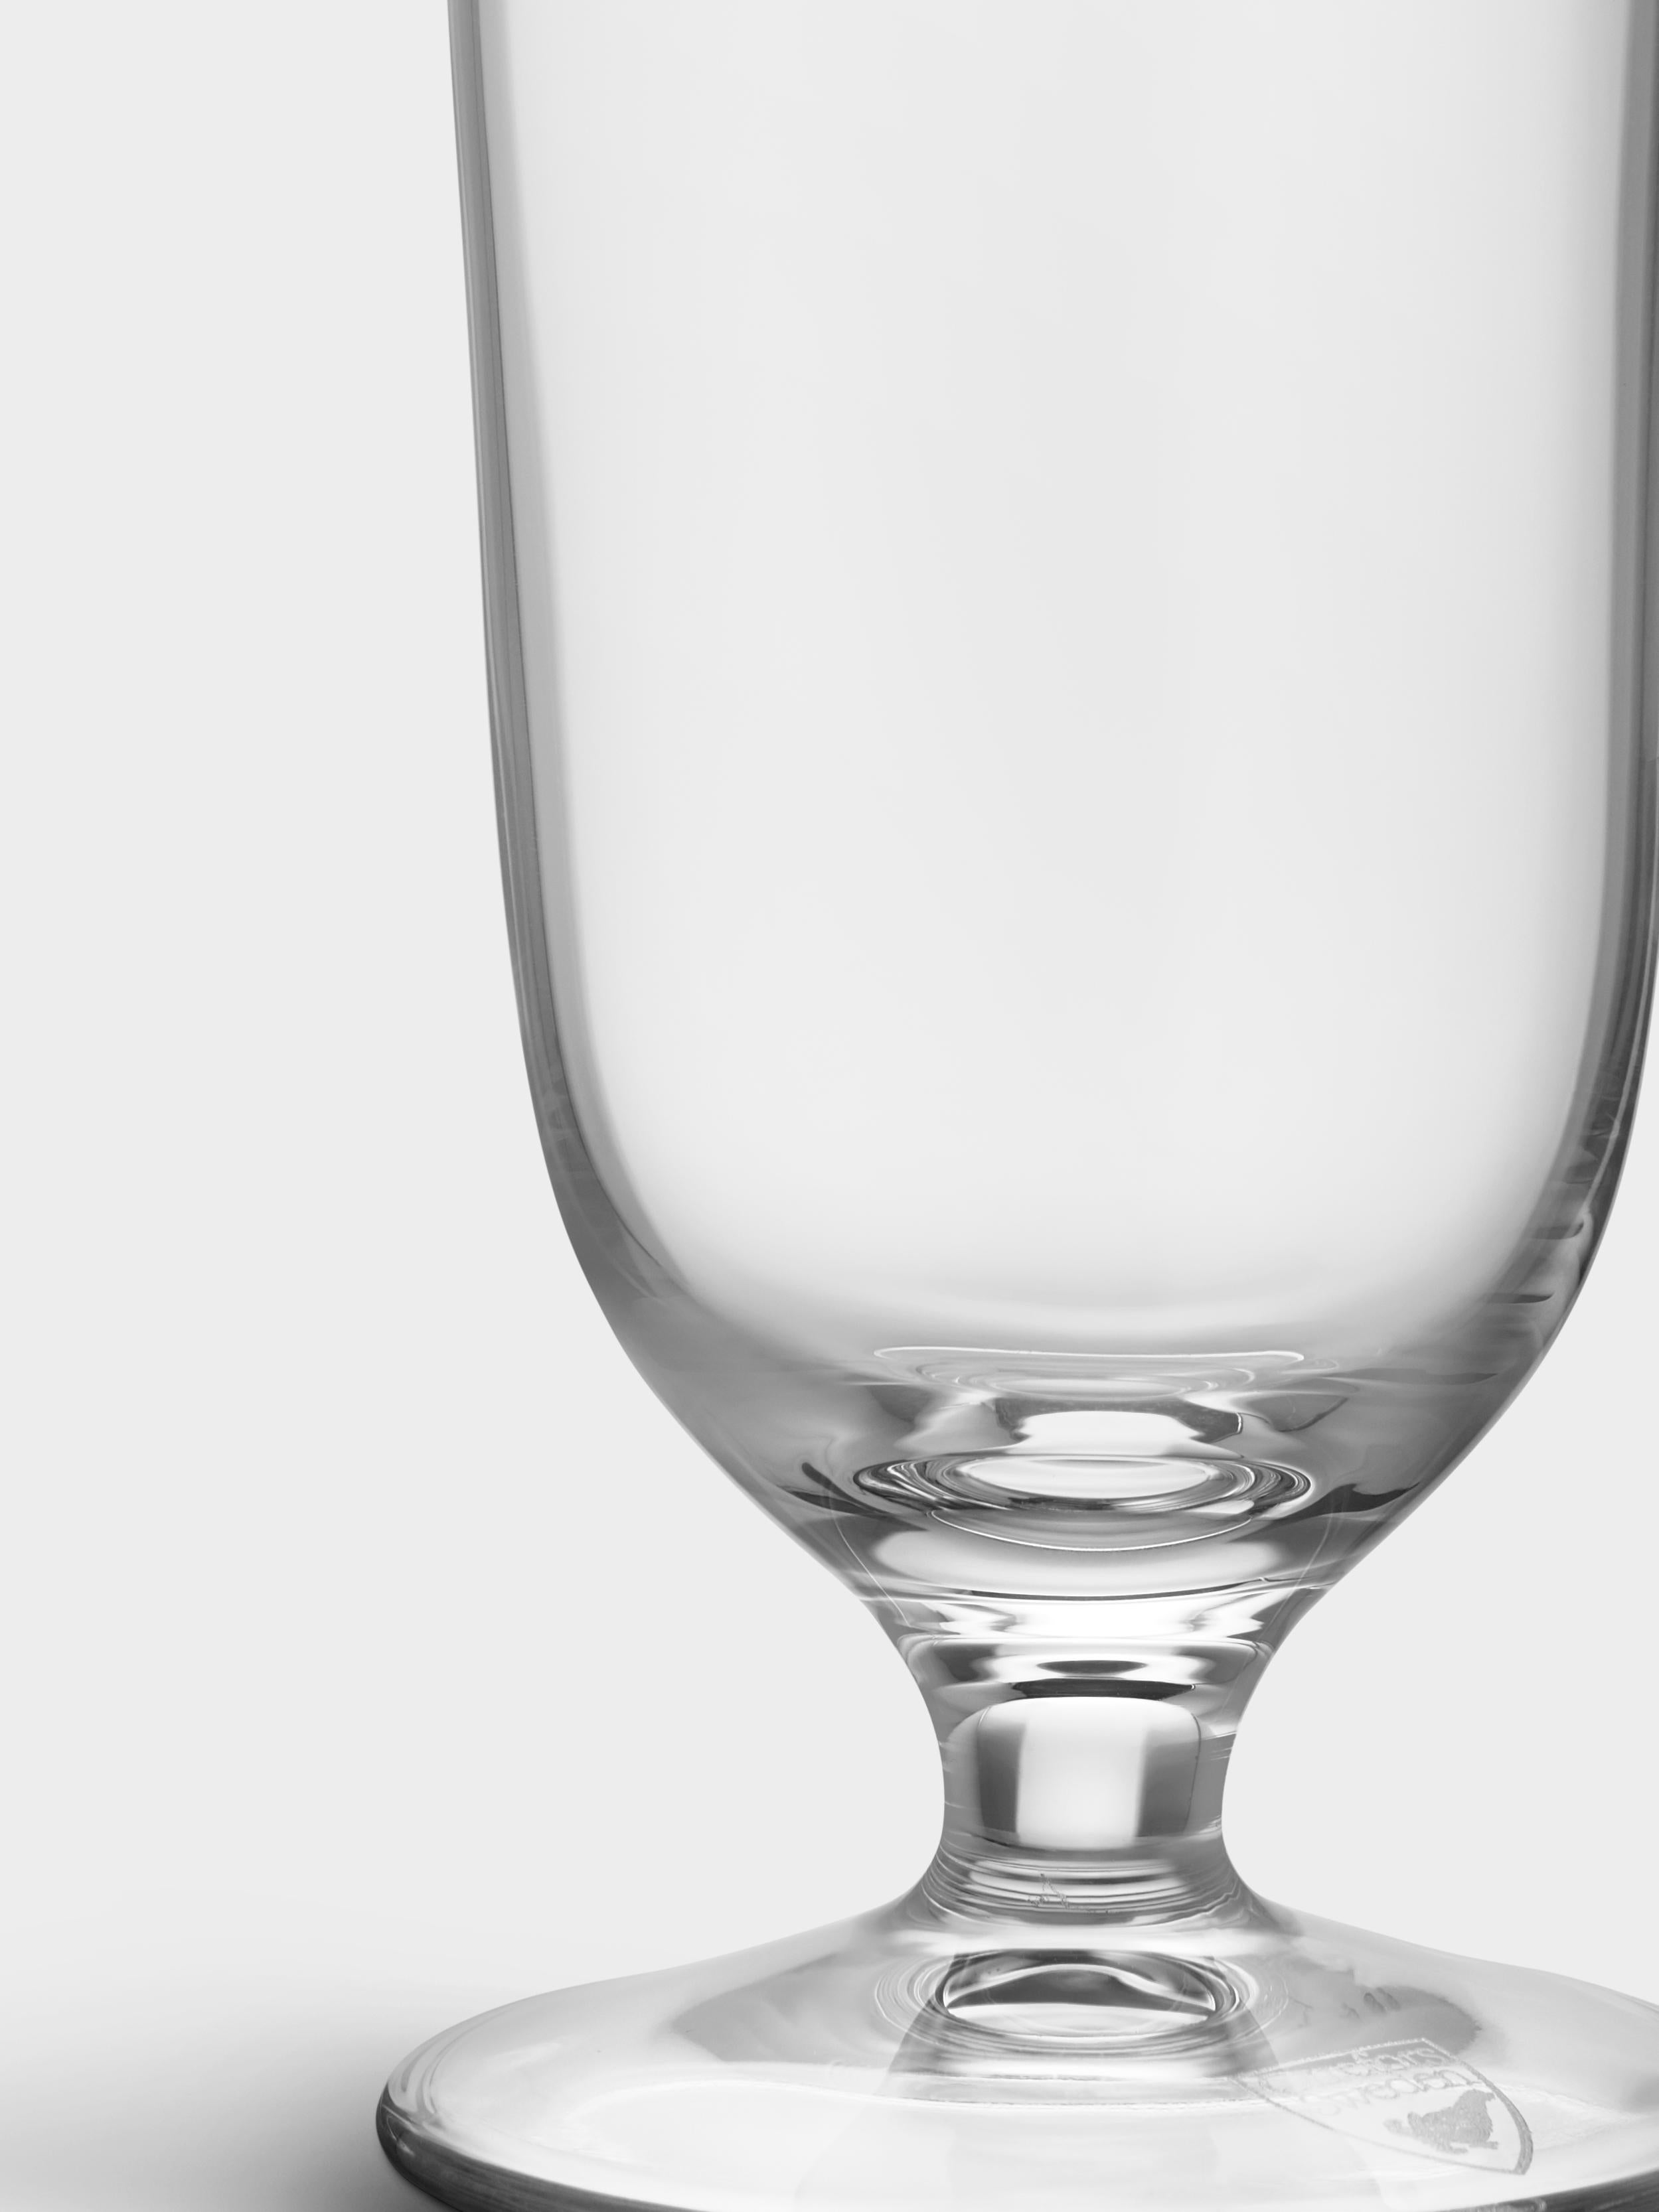 Beer Pilsner from Orrefors holds 15.5 oz and is a tall, straight beer glass that elegantly brings out the bitterness of pilsner. A light, hops-forward pilsner will come into its own in this tall glass. The elongated shape also makes it well-suited